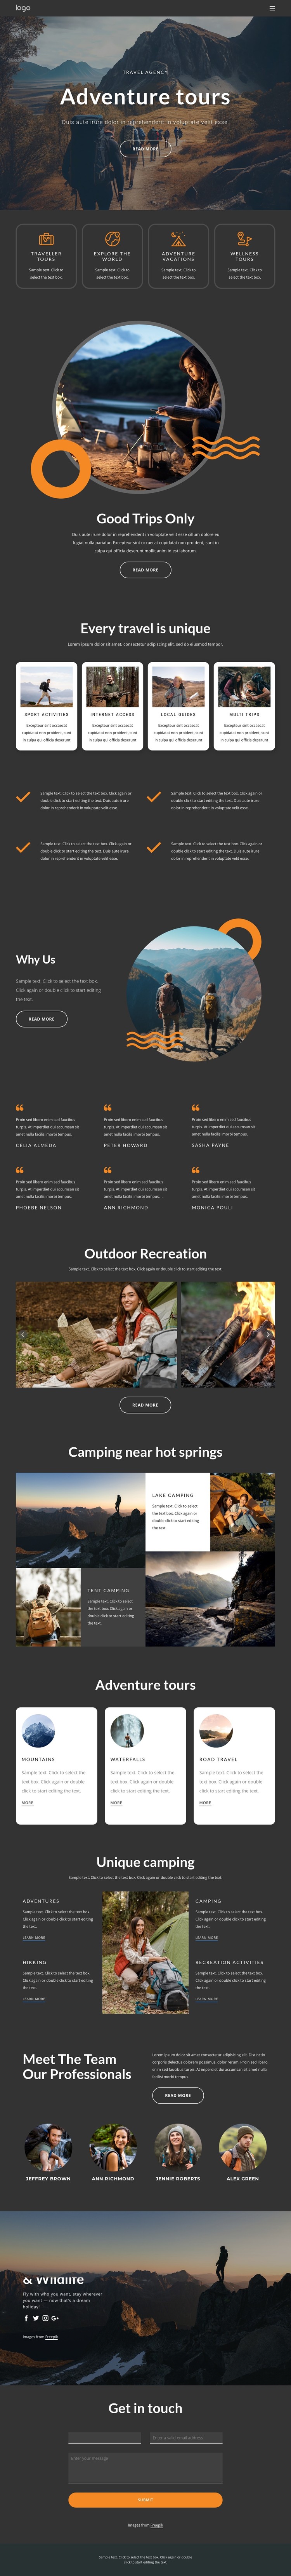 About our adventure tours CSS Template